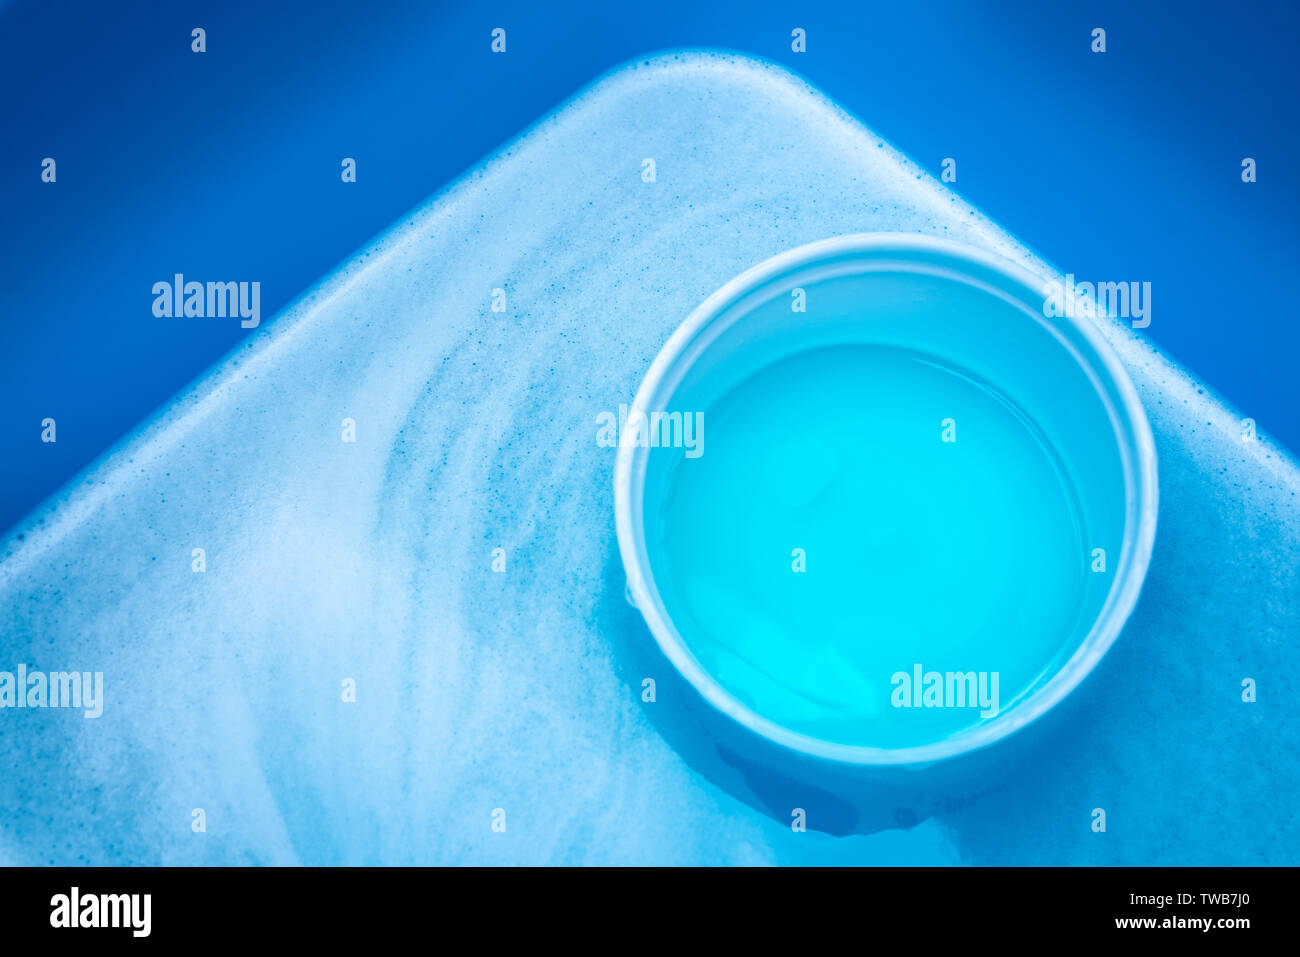 Abstract blue and turquoise water container background buckets Stock Photo